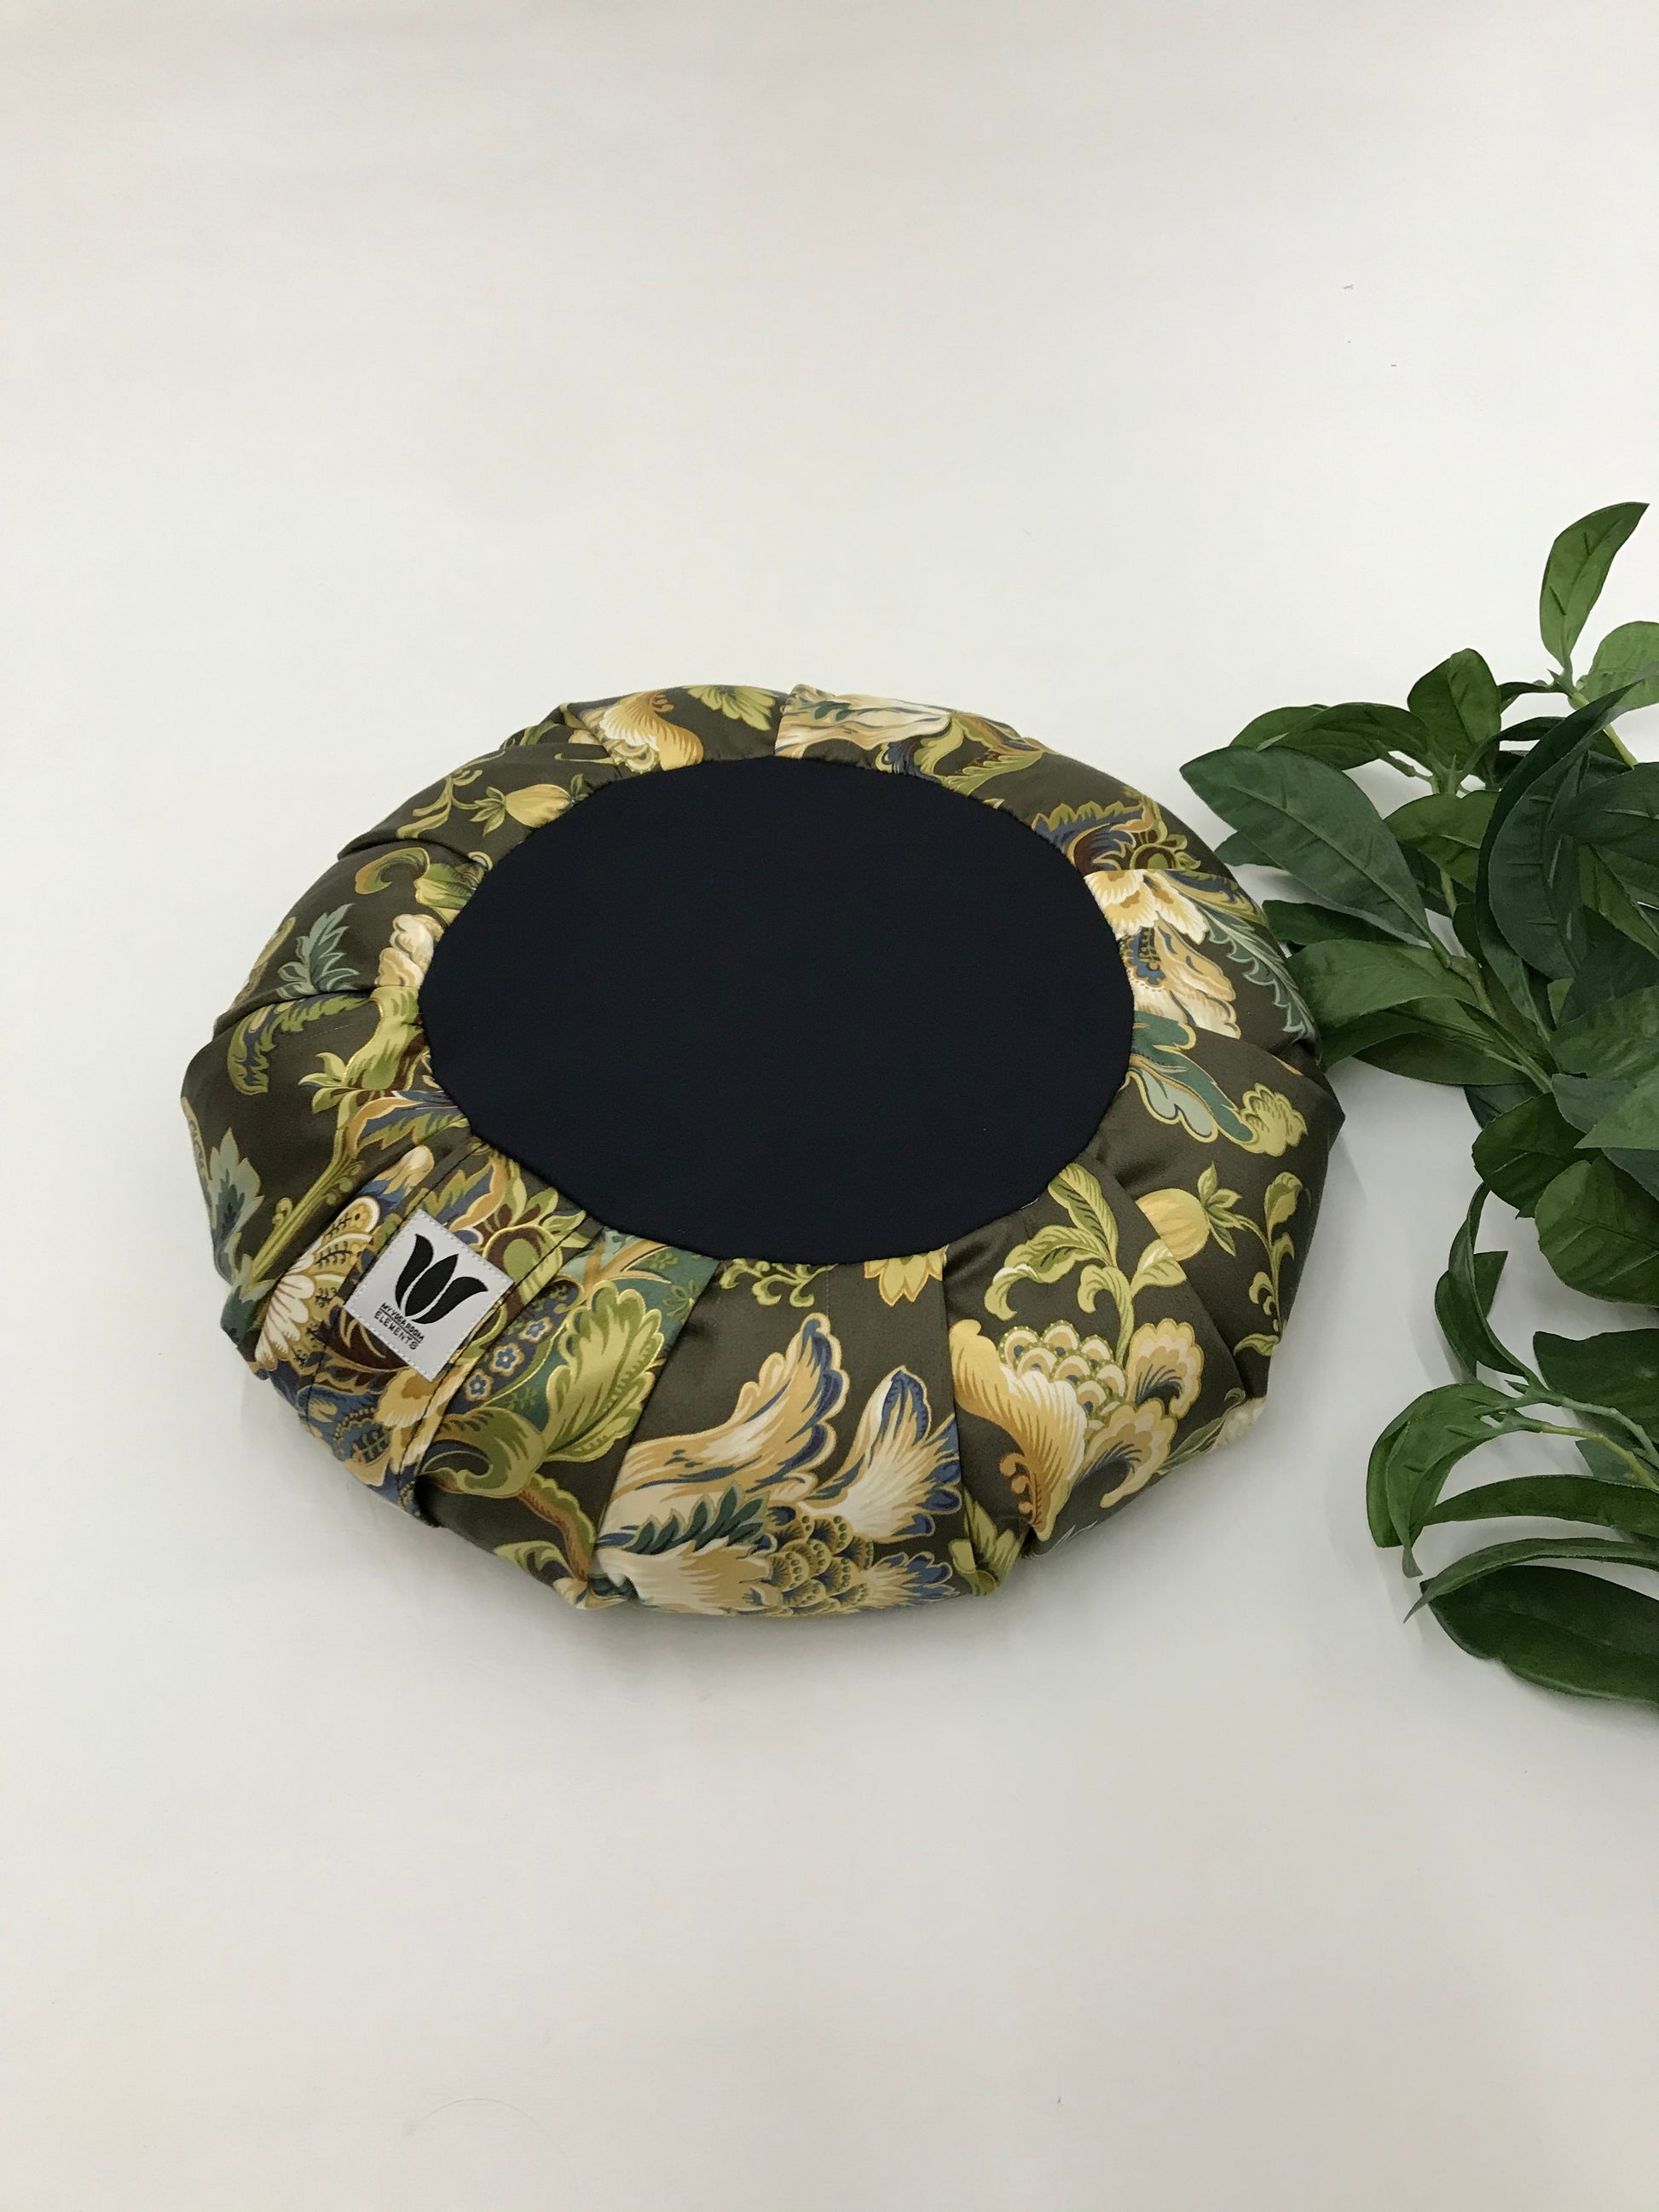 Handcrafted premium cotton sateen fabric meditation seat cushion in rich green and gold floral print fabric. Align the spine and body in comfort to calm the monkey mind in your meditation practice. Handcrafted in Calgary, Alberta Canada